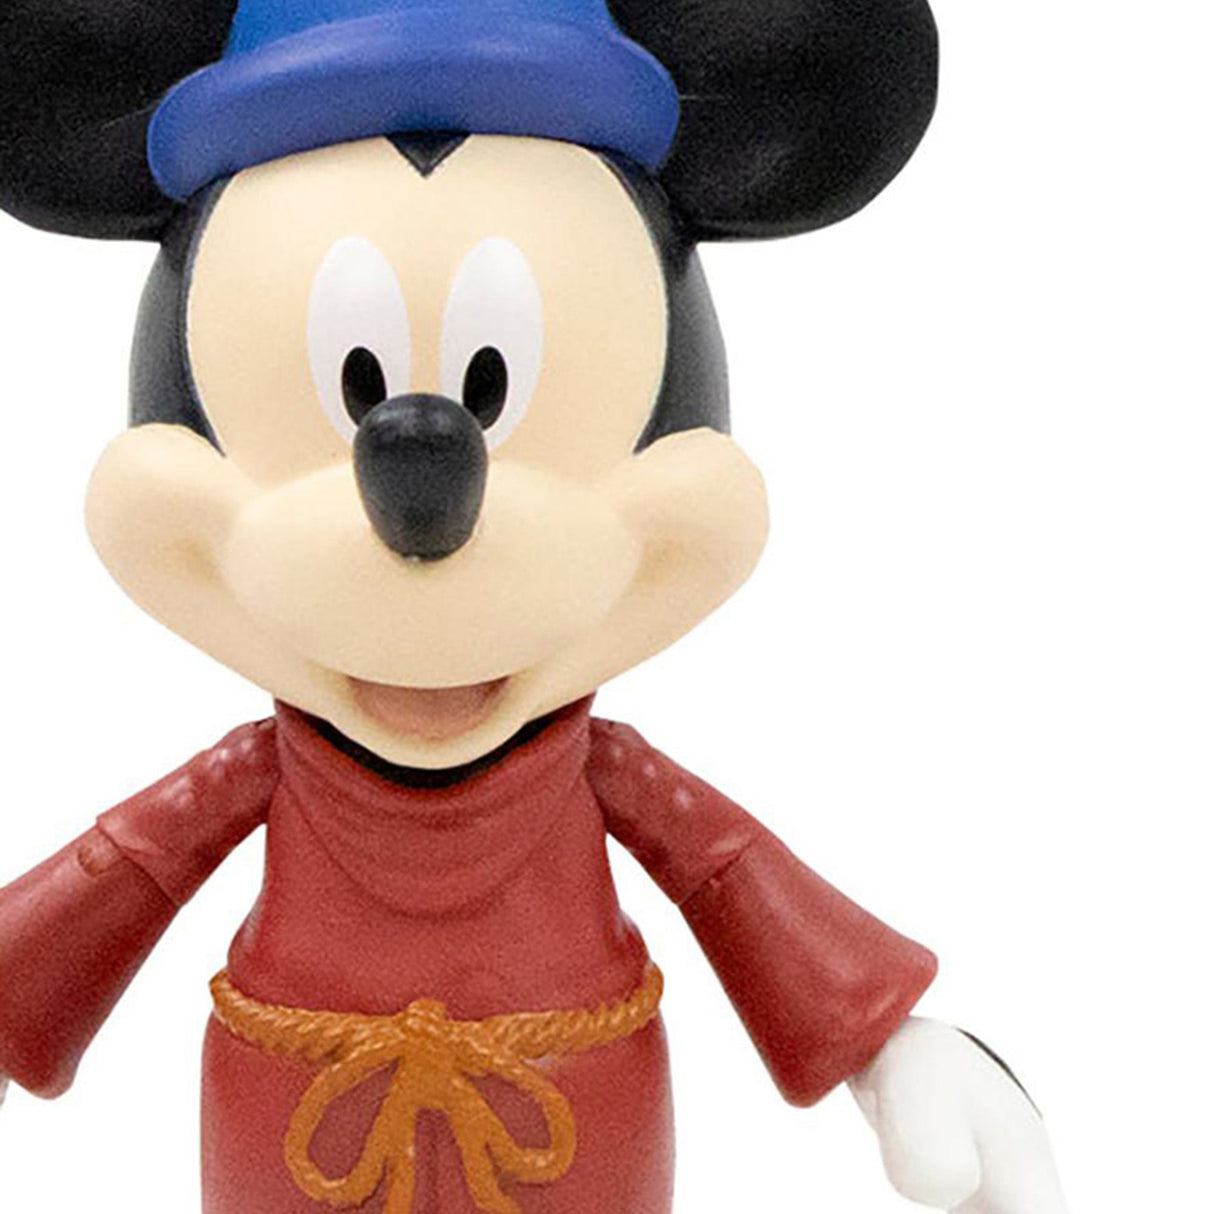 Disney 100 Collector Figure - Sorcerer's Apprentice Mickey Mouse (6 inches)